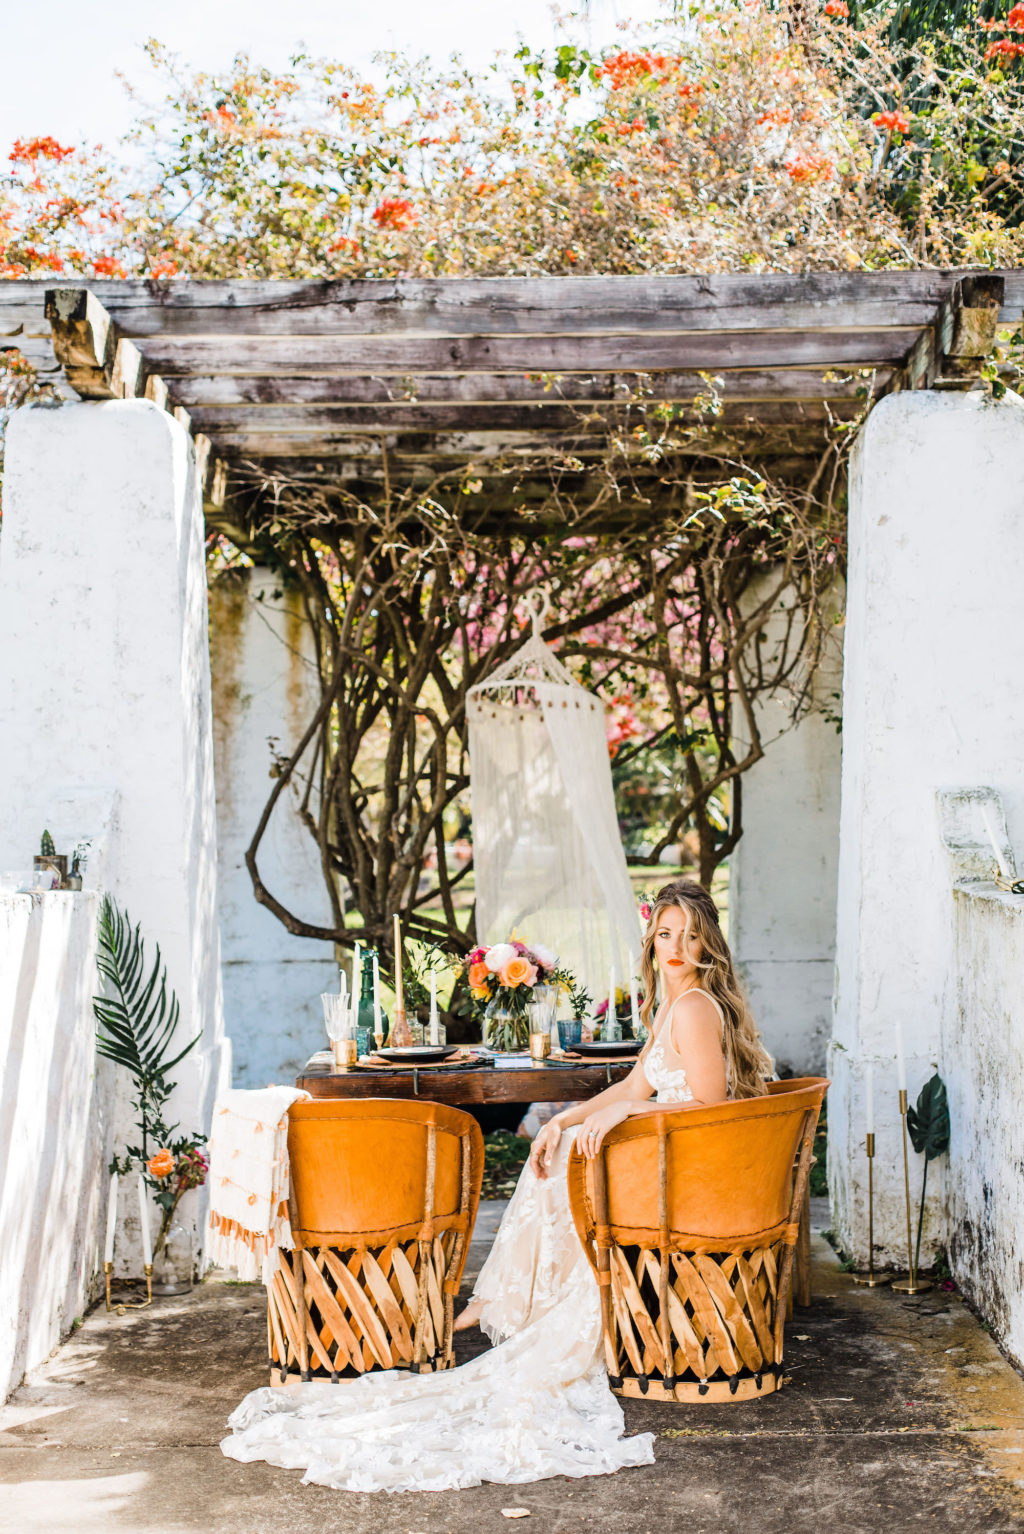 Mexican Inspired Colorful St. Pete Wedding Styled Shoot with Boho Chic Wooden Chairs